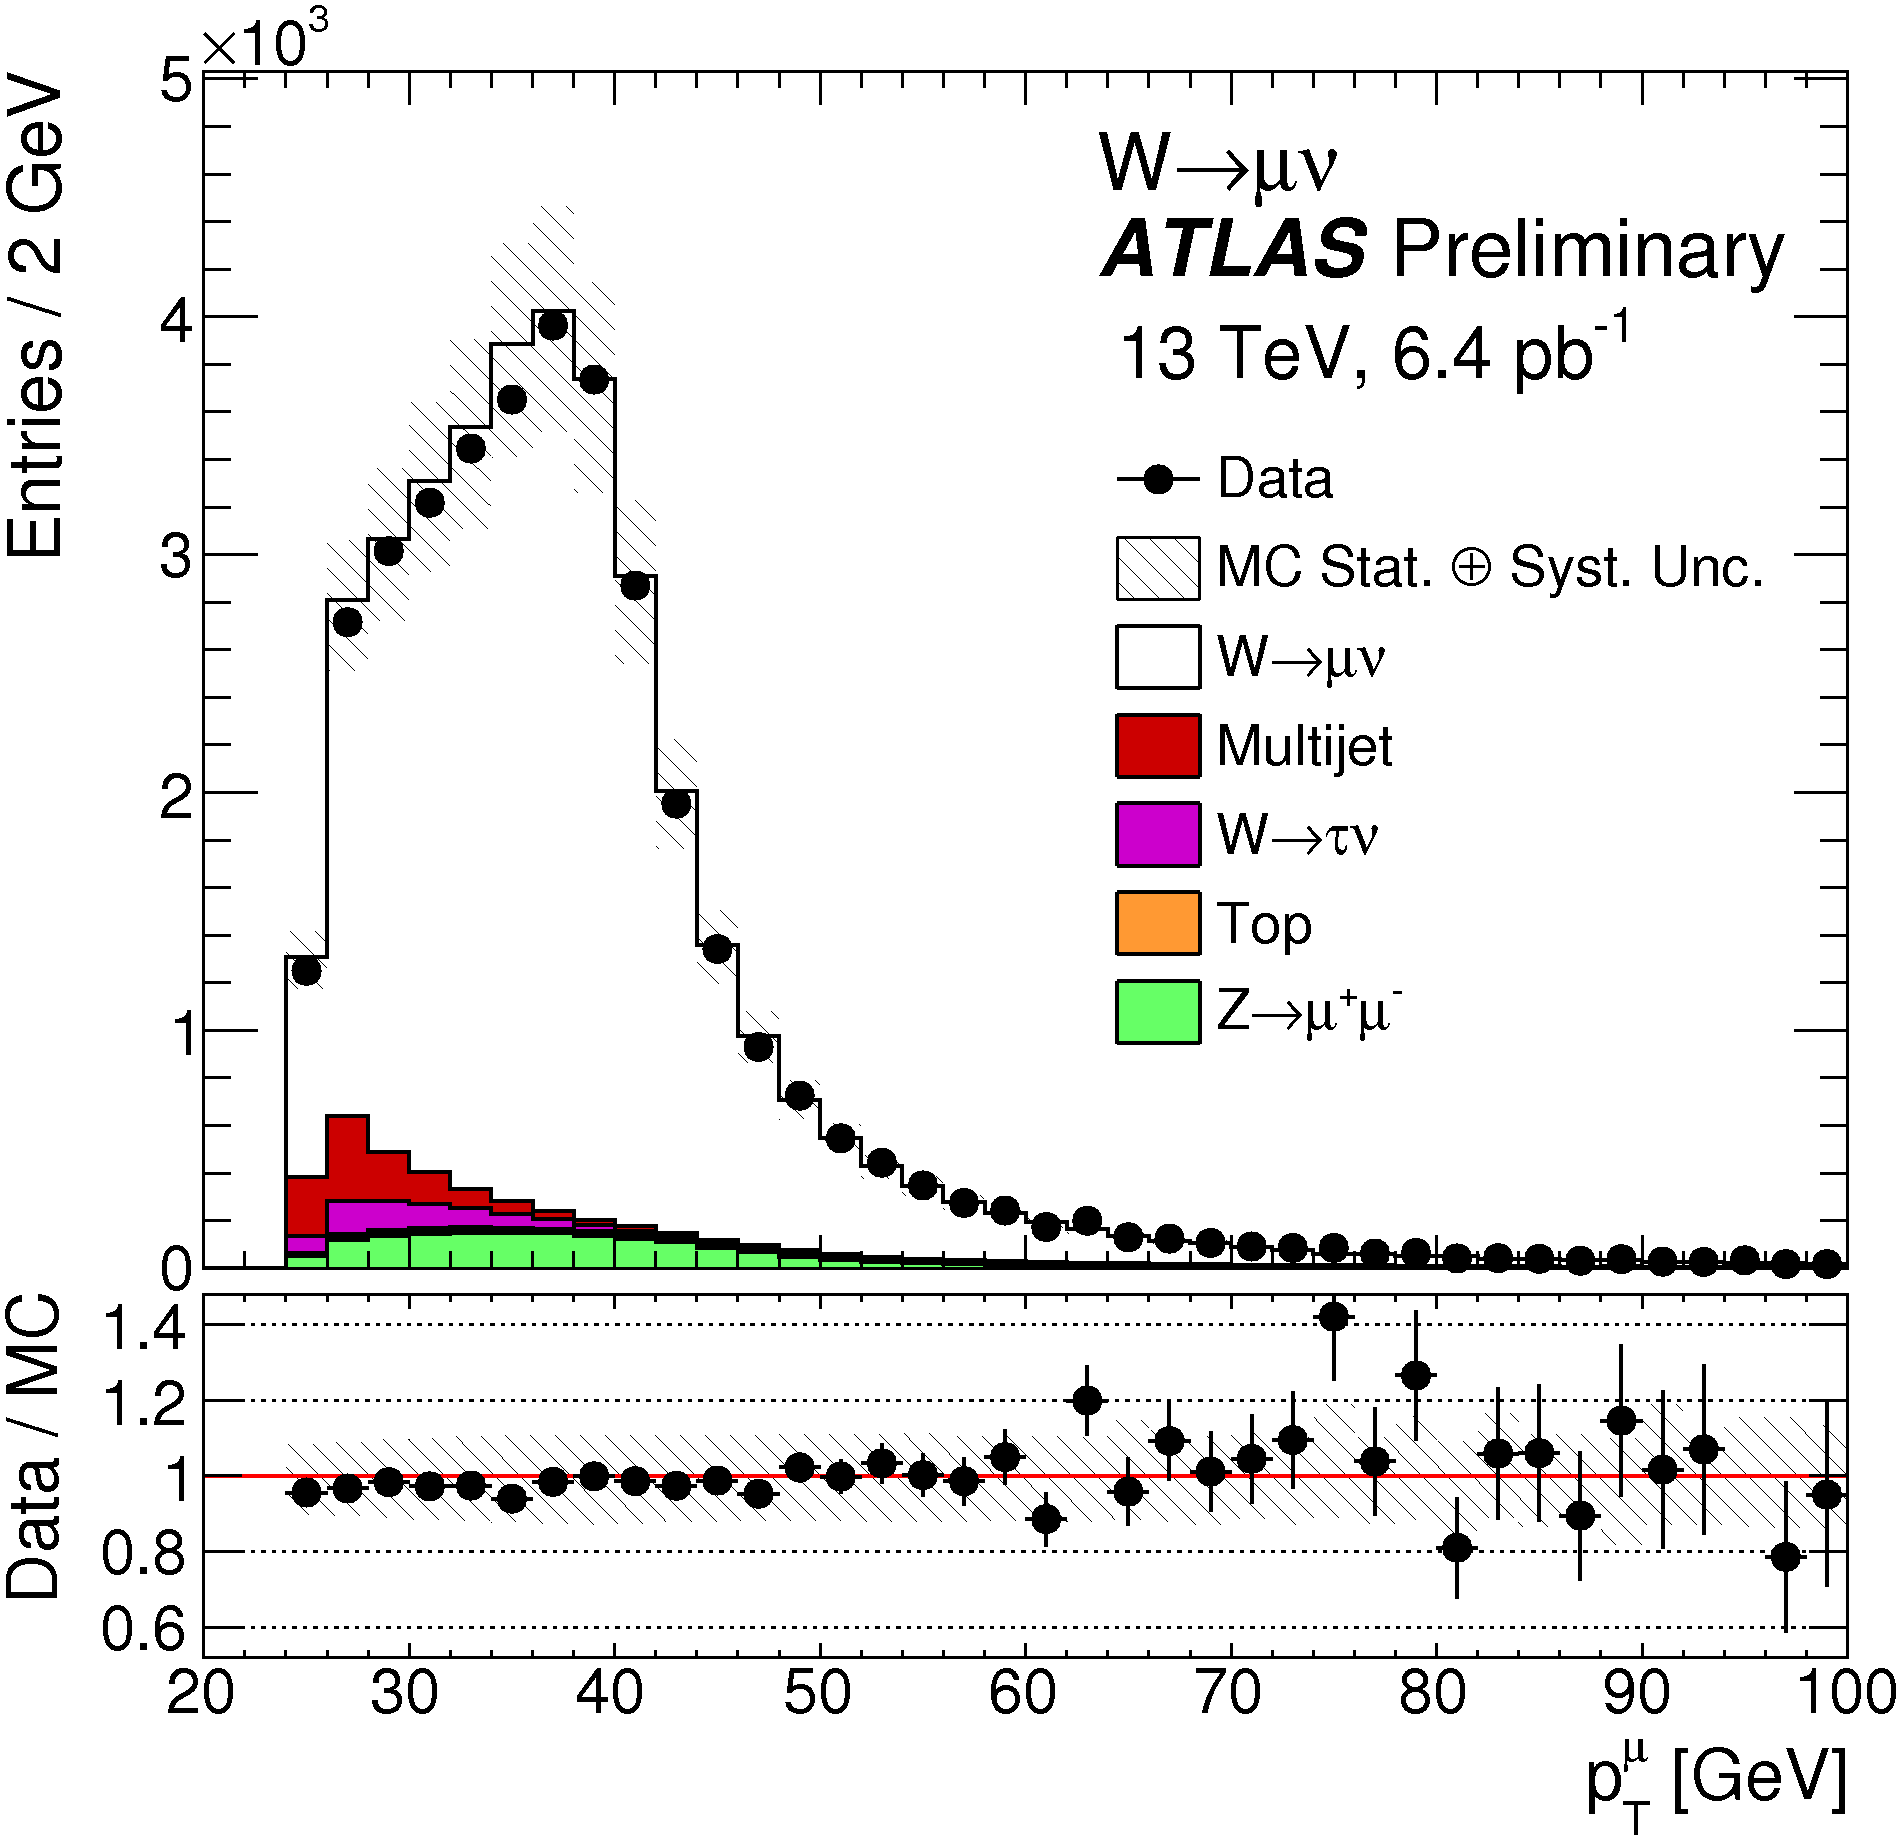 Lepton transverse momentum distribution from the W→ μν selection